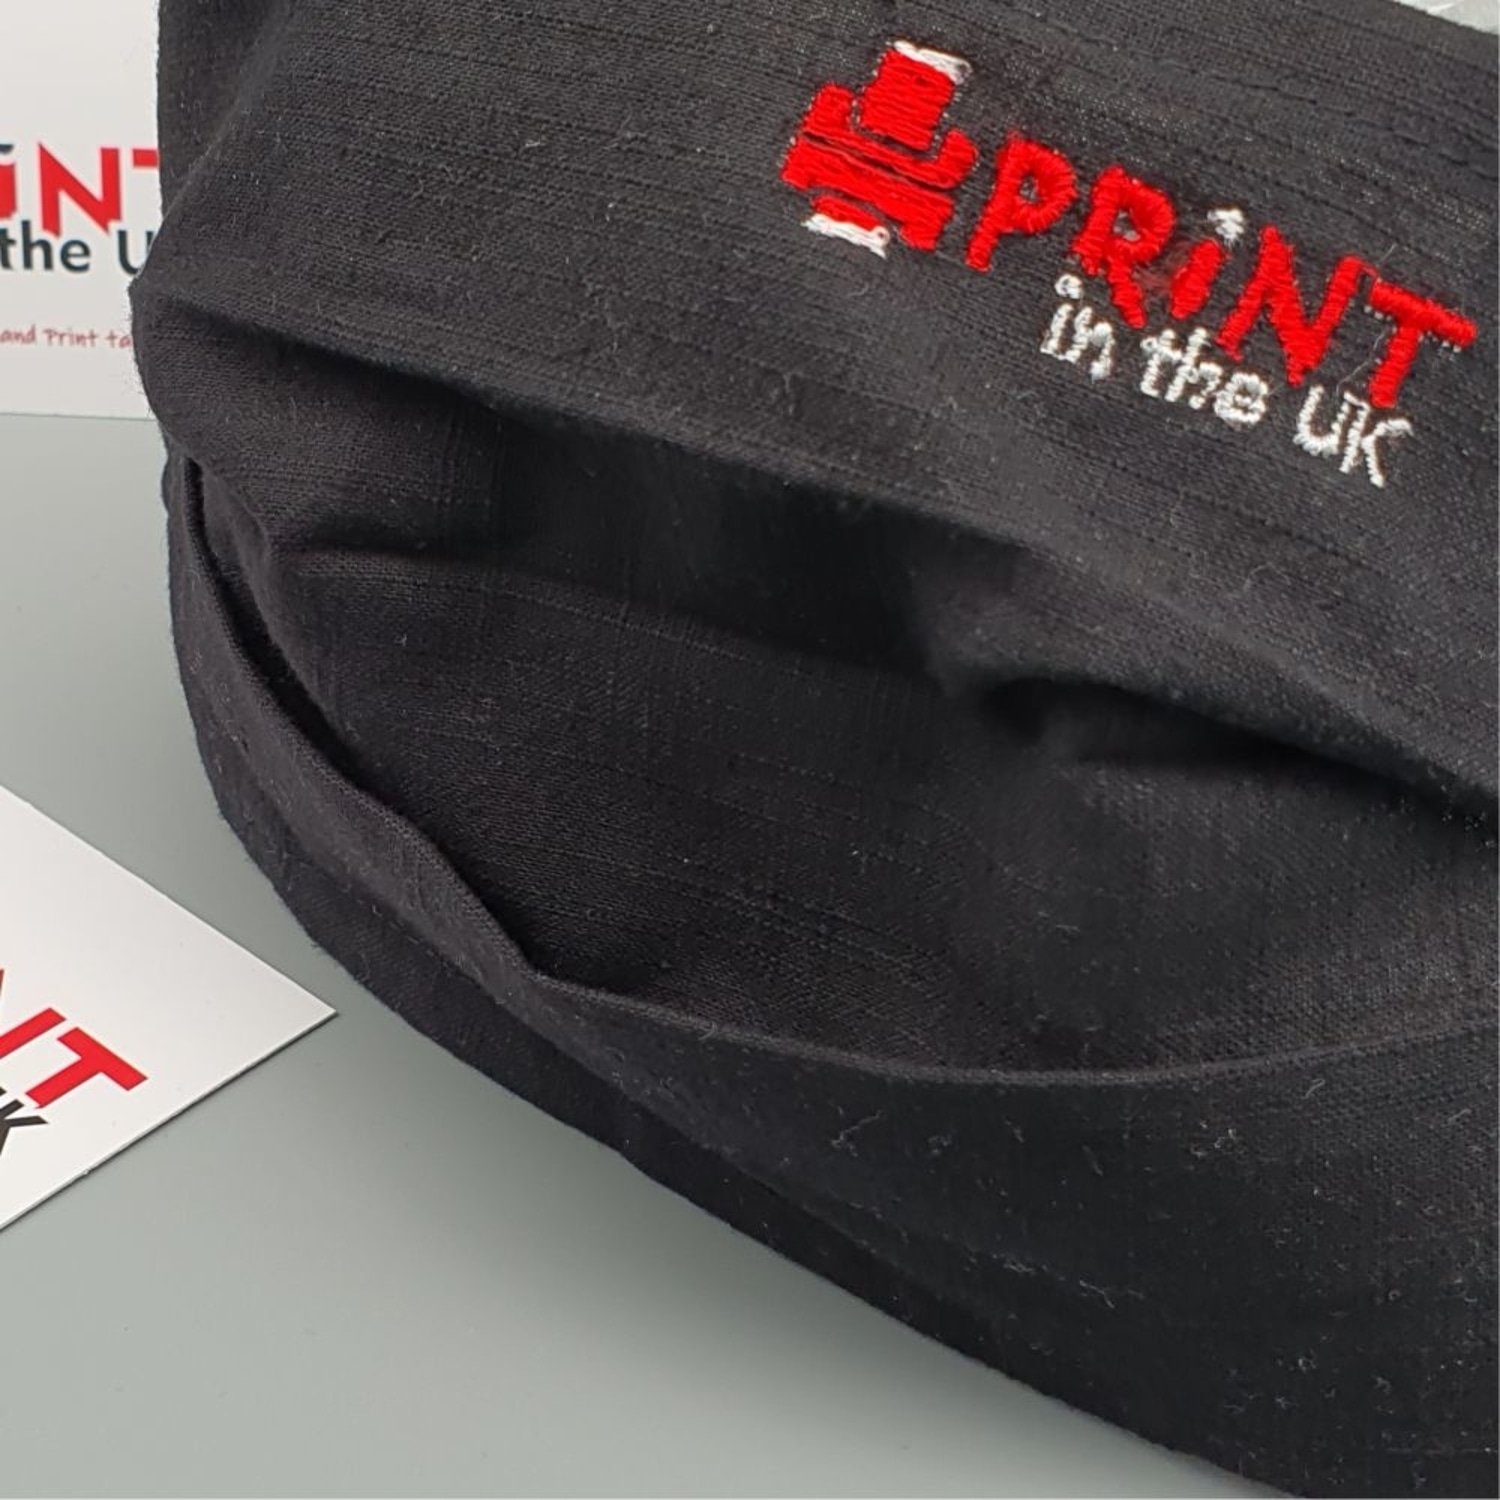 Print In The UK - The Personal Touch, Professional Way!